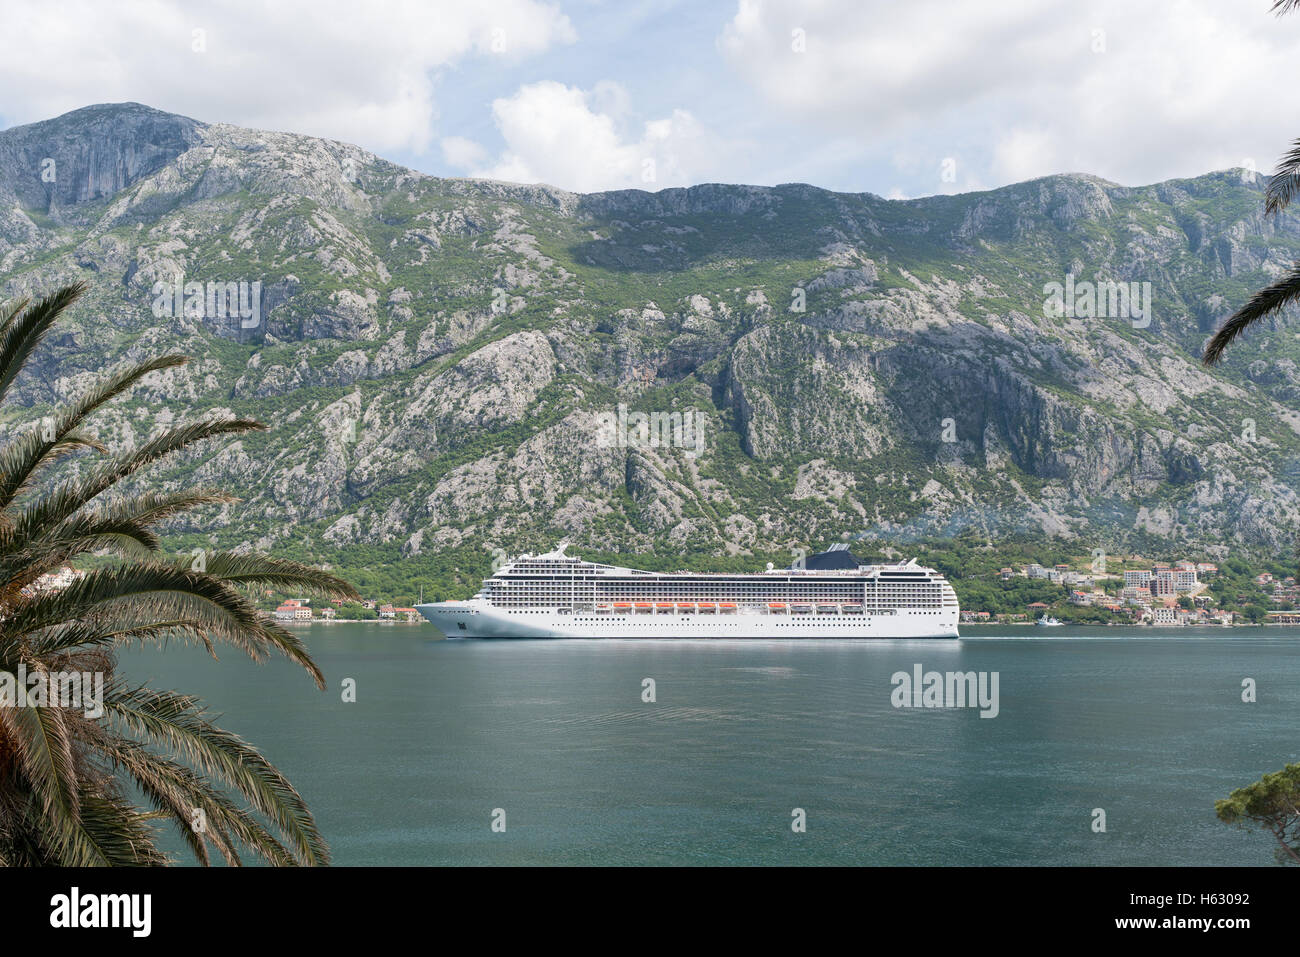 Celebrity Cruise Ship High Resolution Stock Photography and Images - Alamy